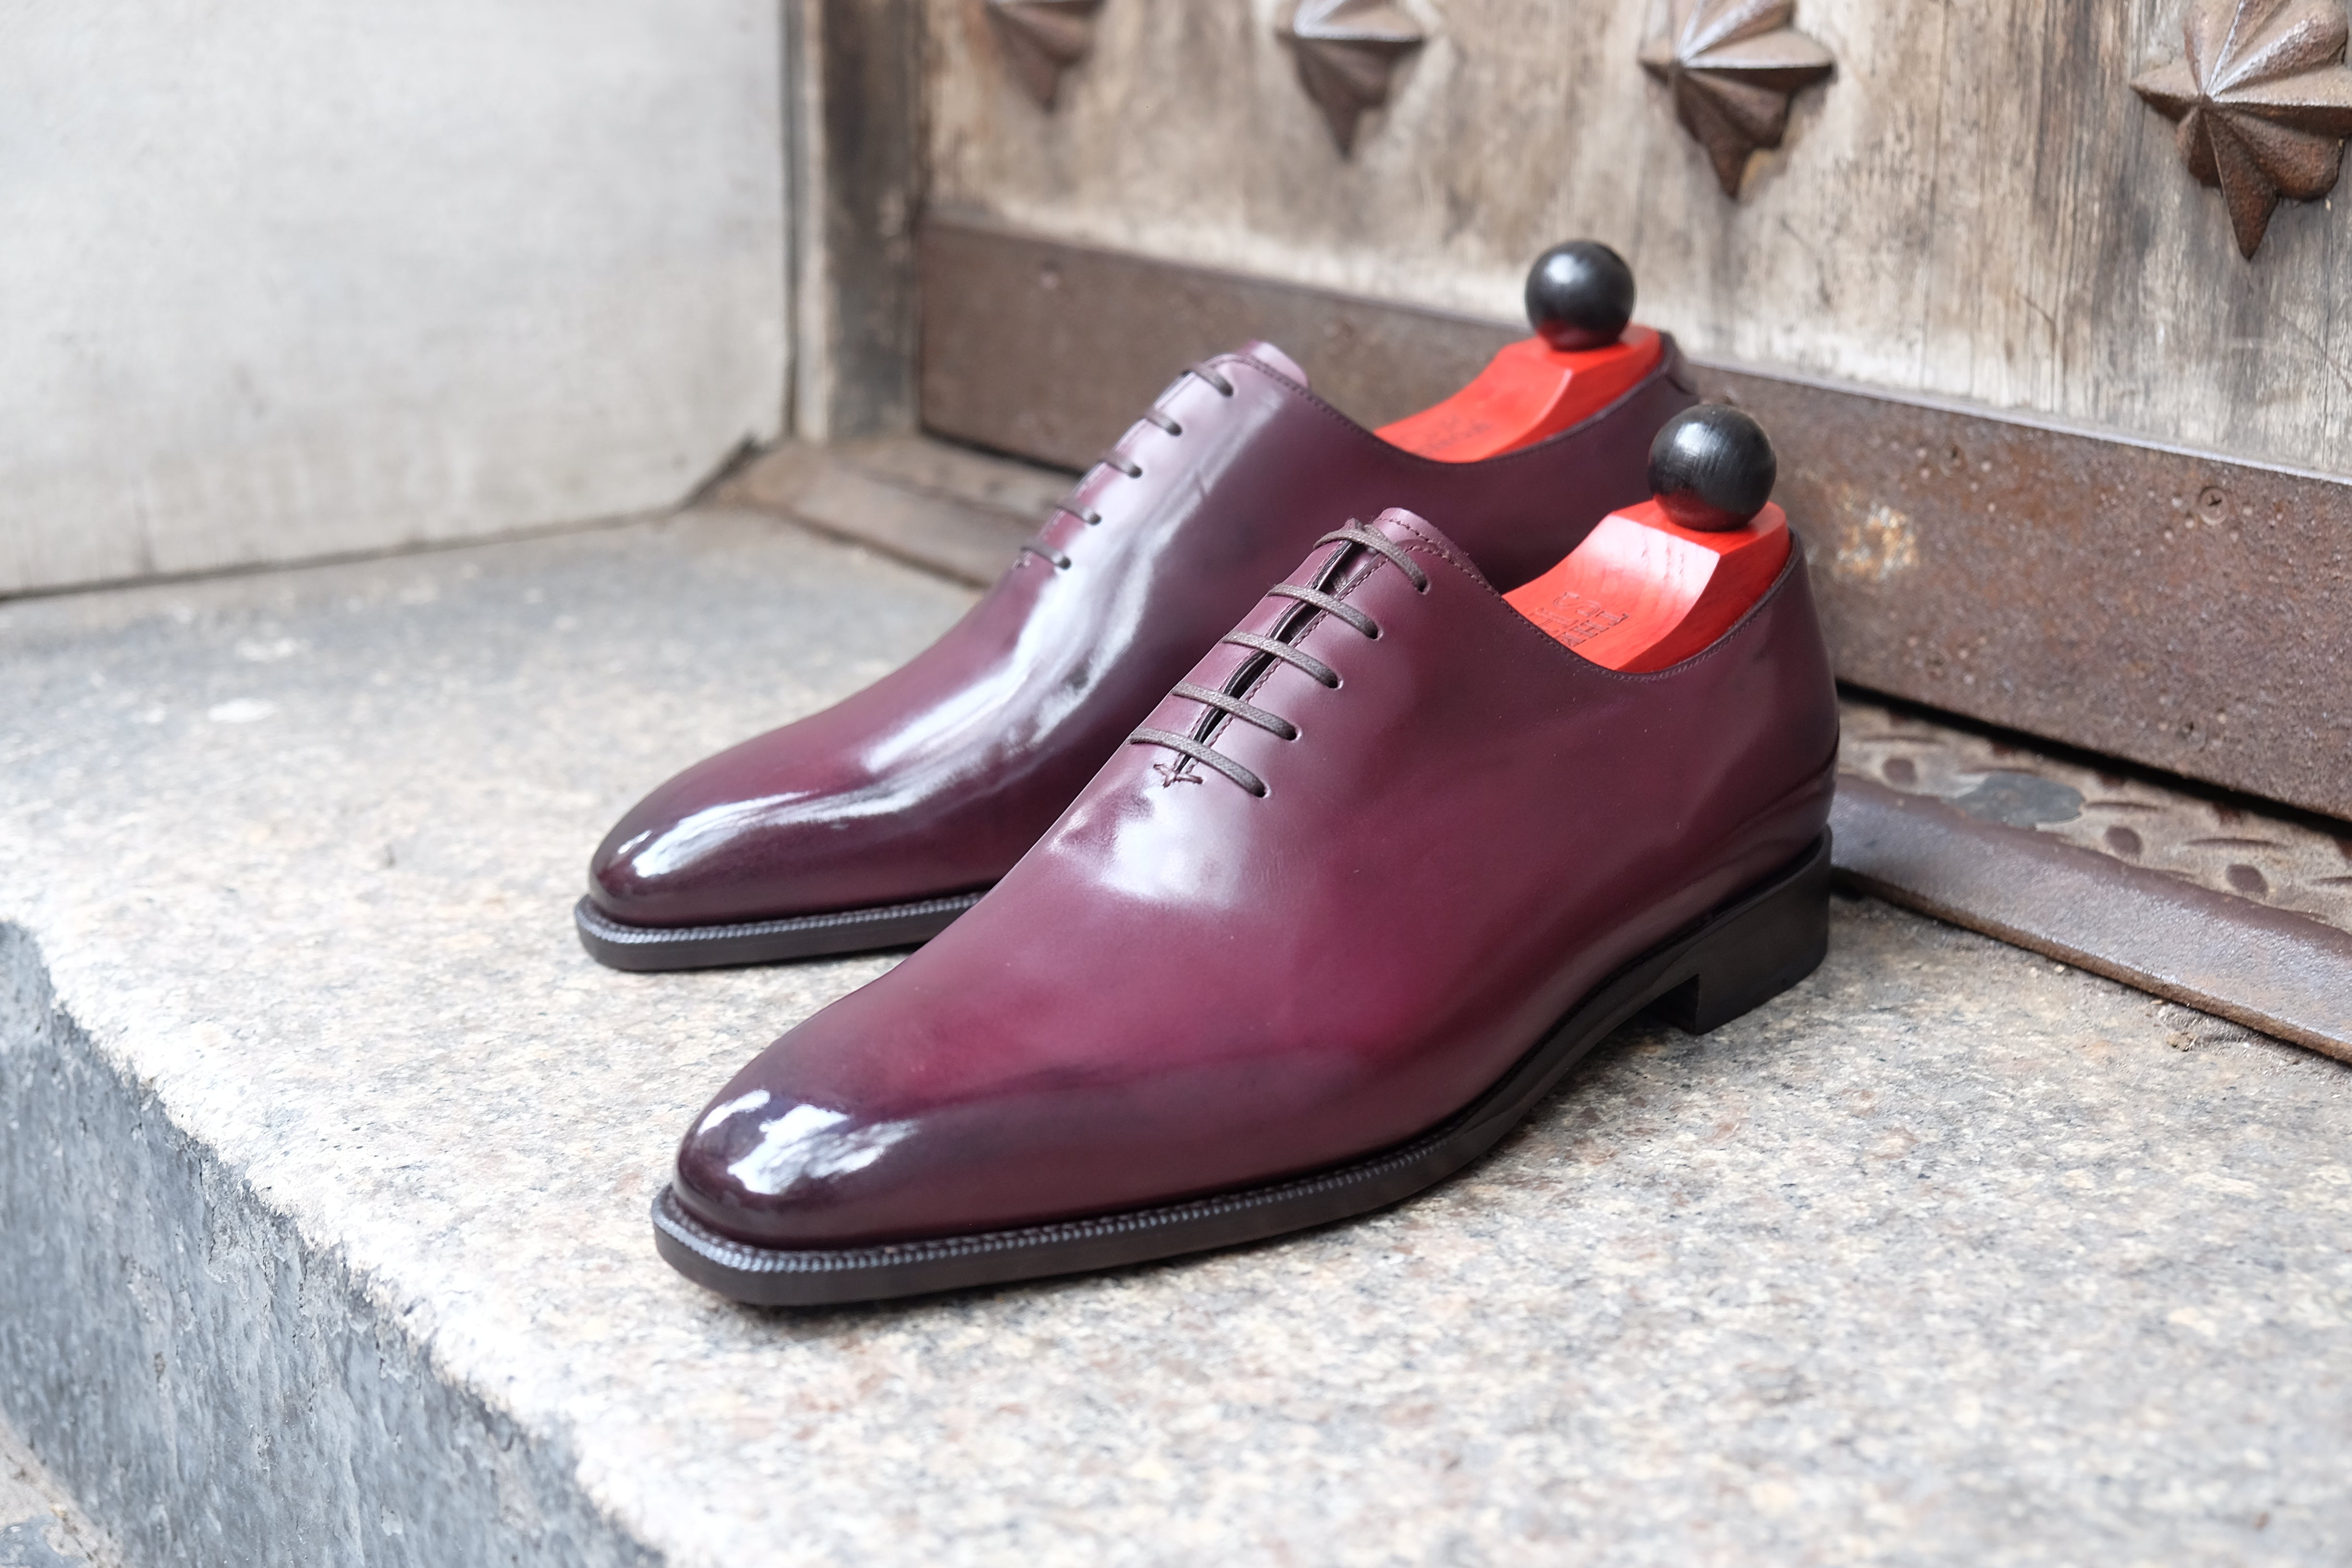 Skyway - MTO - Mulberry Calf - LPB Last - Single Leather Sole